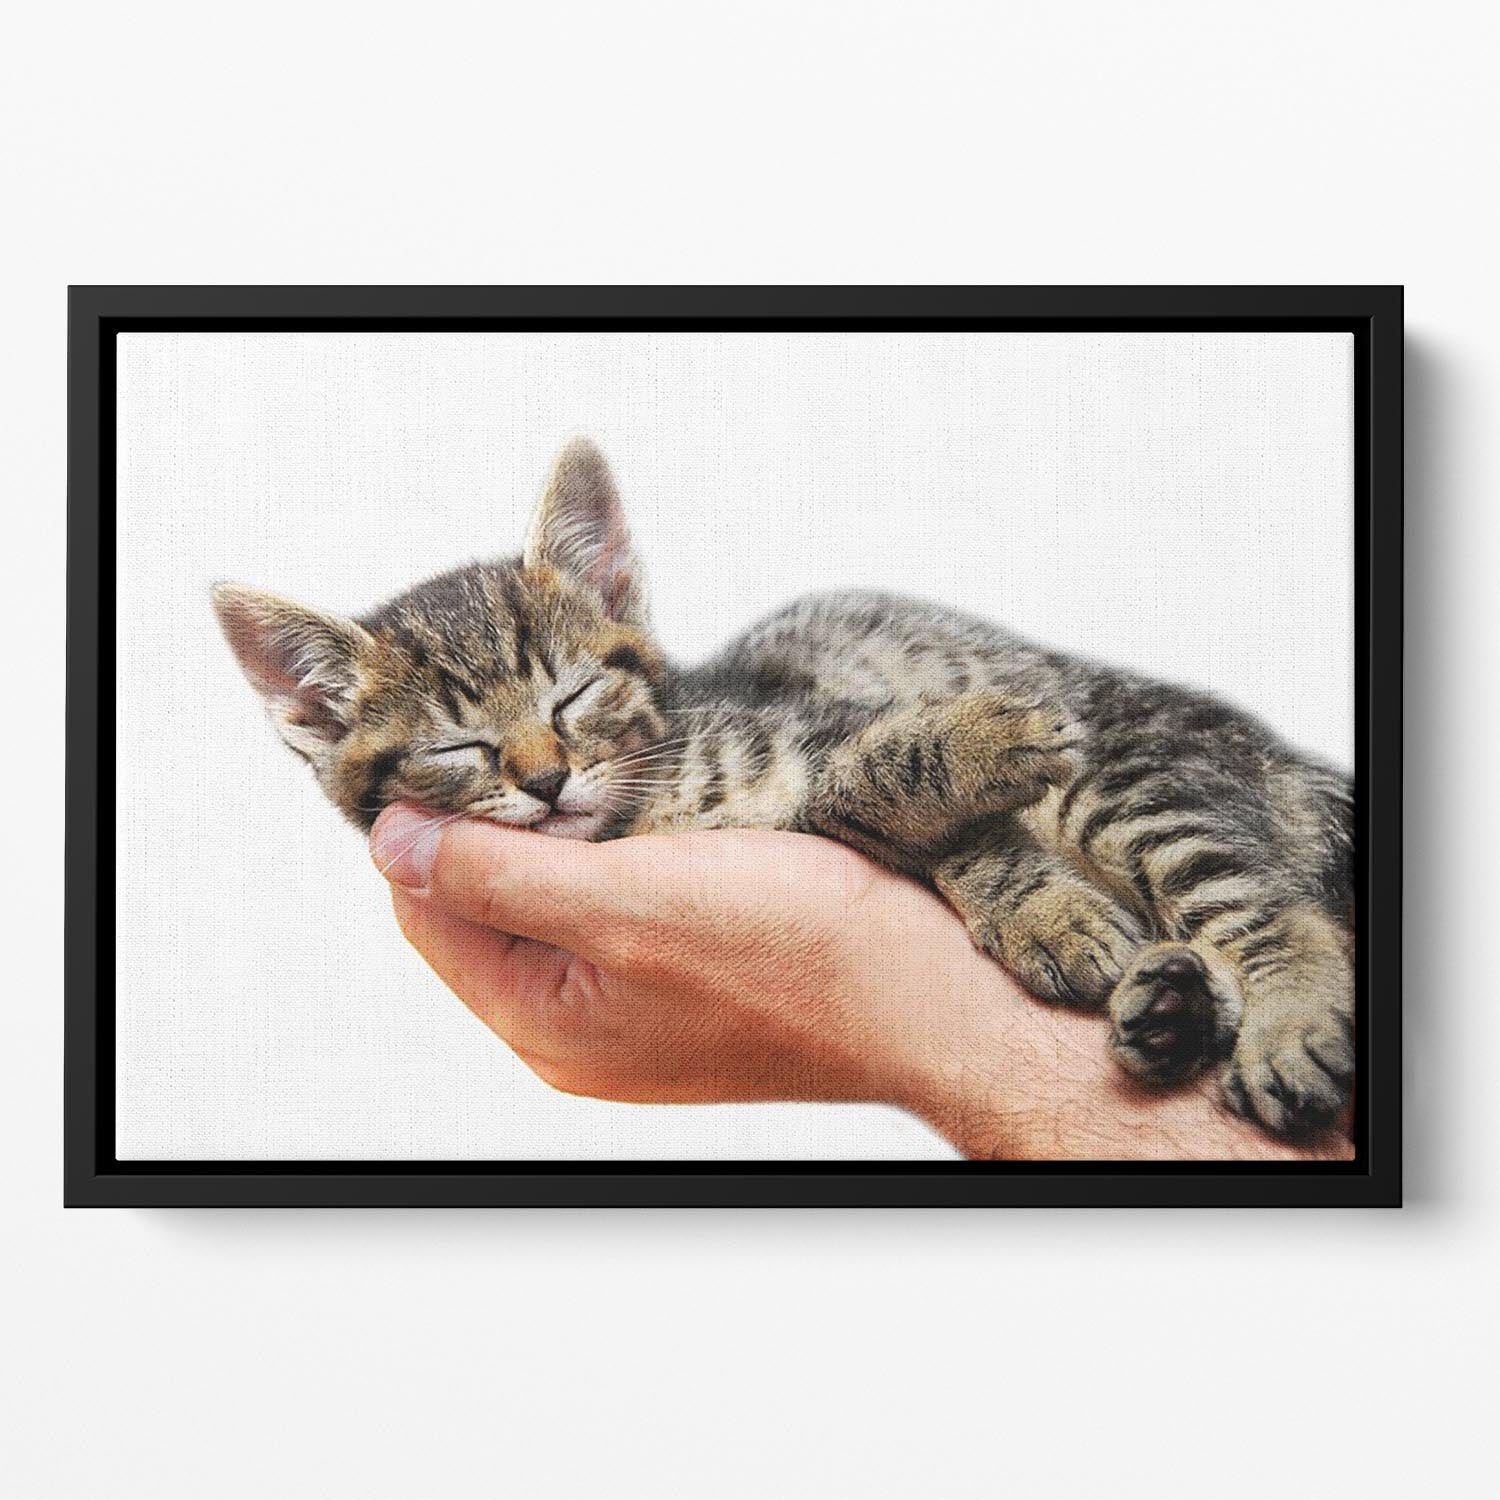 Little baby cat sleeping in male arms Floating Framed Canvas - Canvas Art Rocks - 2